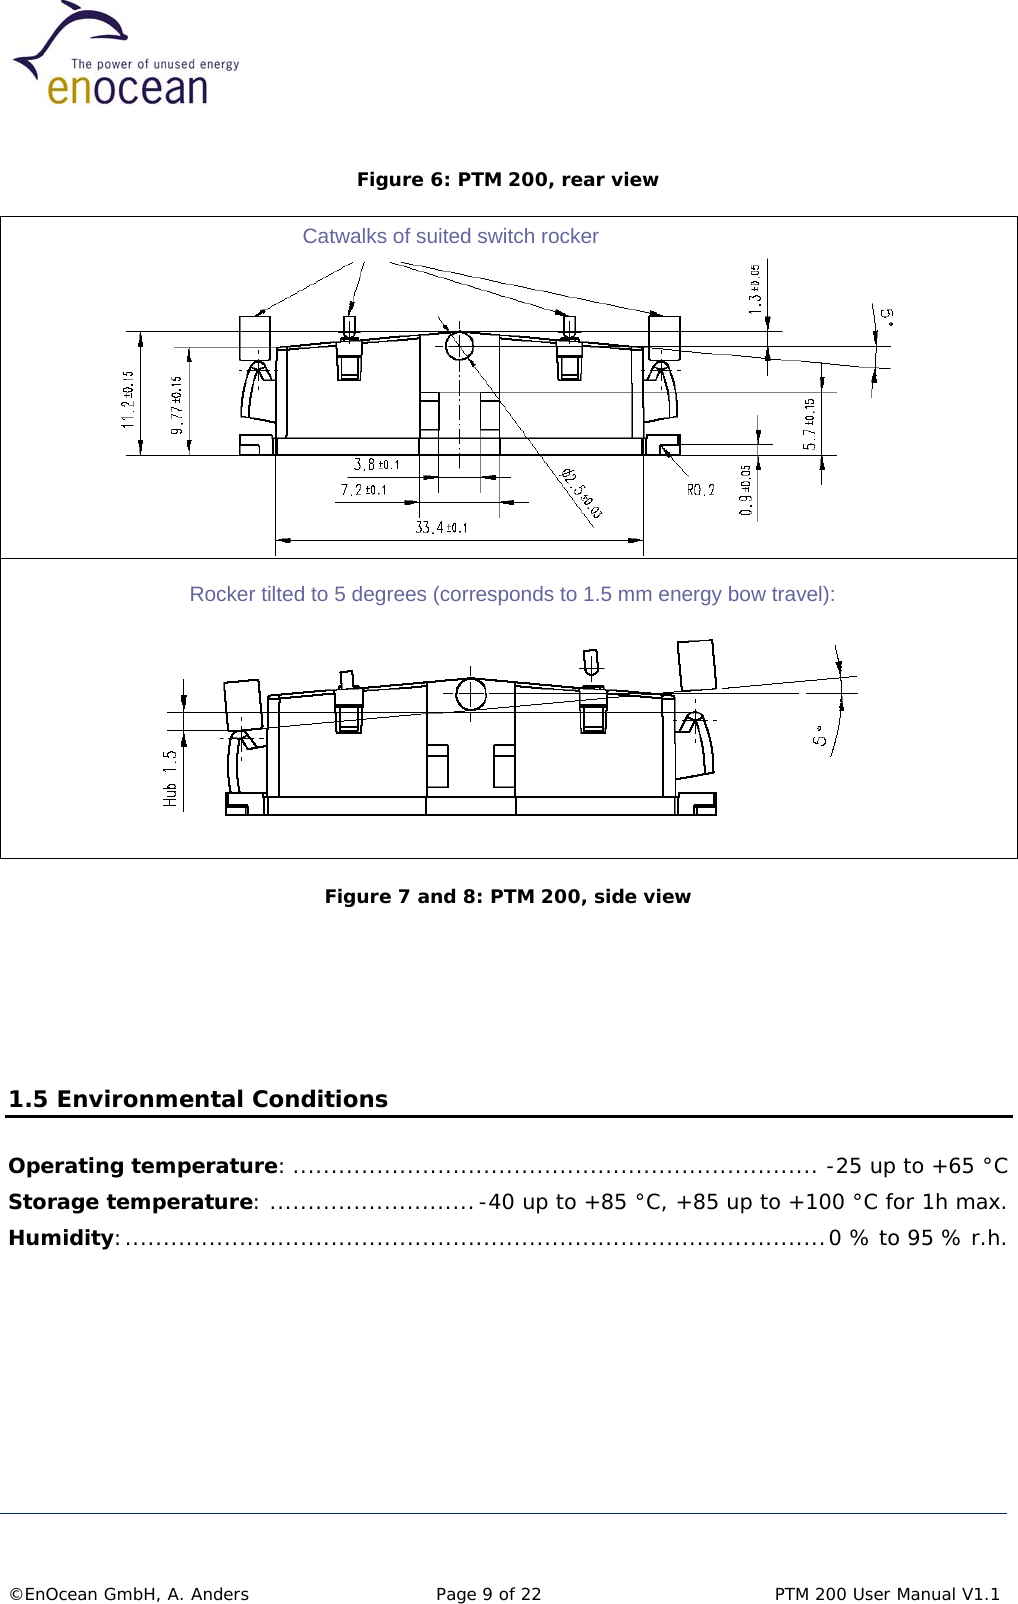   Figure 6: PTM 200, rear view    Catwalks of suited switch rockerRocker tilted to 5 degrees (corresponds to 1.5 mm energy bow travel):  Figure 7 and 8: PTM 200, side view        1.5 Environmental Conditions Operating temperature: ..................................................................... -25 up to +65 °C Storage temperature: ...........................-40 up to +85 °C, +85 up to +100 °C for 1h max. Humidity:............................................................................................0 % to 95 % r.h.         ©EnOcean GmbH, A. Anders   Page 9 of 22    PTM 200 User Manual V1.1  